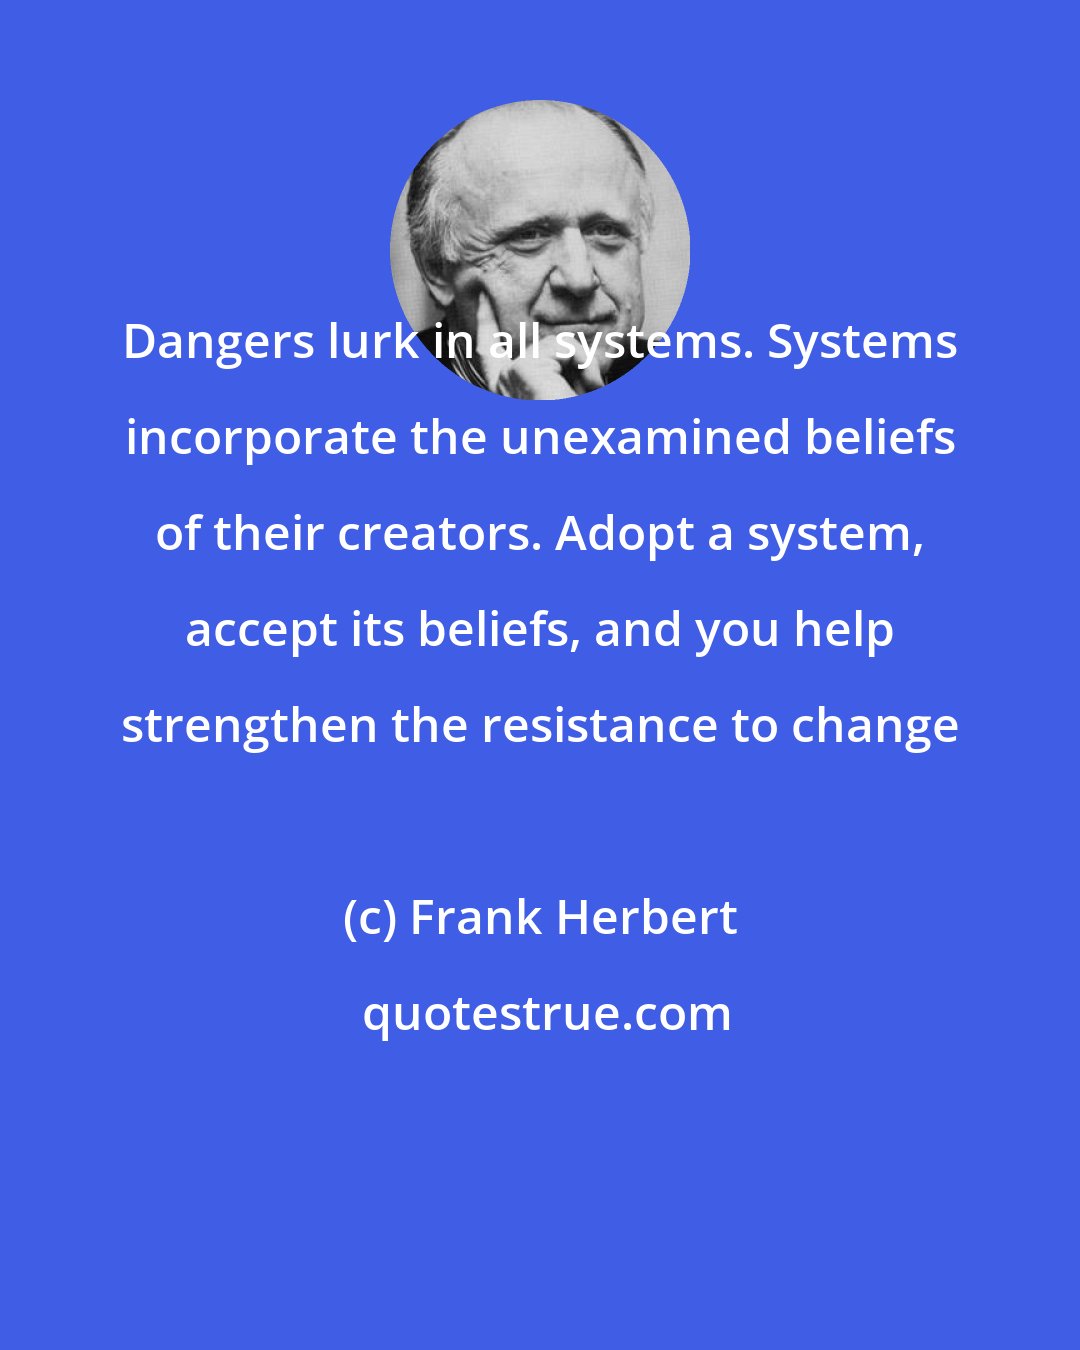 Frank Herbert: Dangers lurk in all systems. Systems incorporate the unexamined beliefs of their creators. Adopt a system, accept its beliefs, and you help strengthen the resistance to change